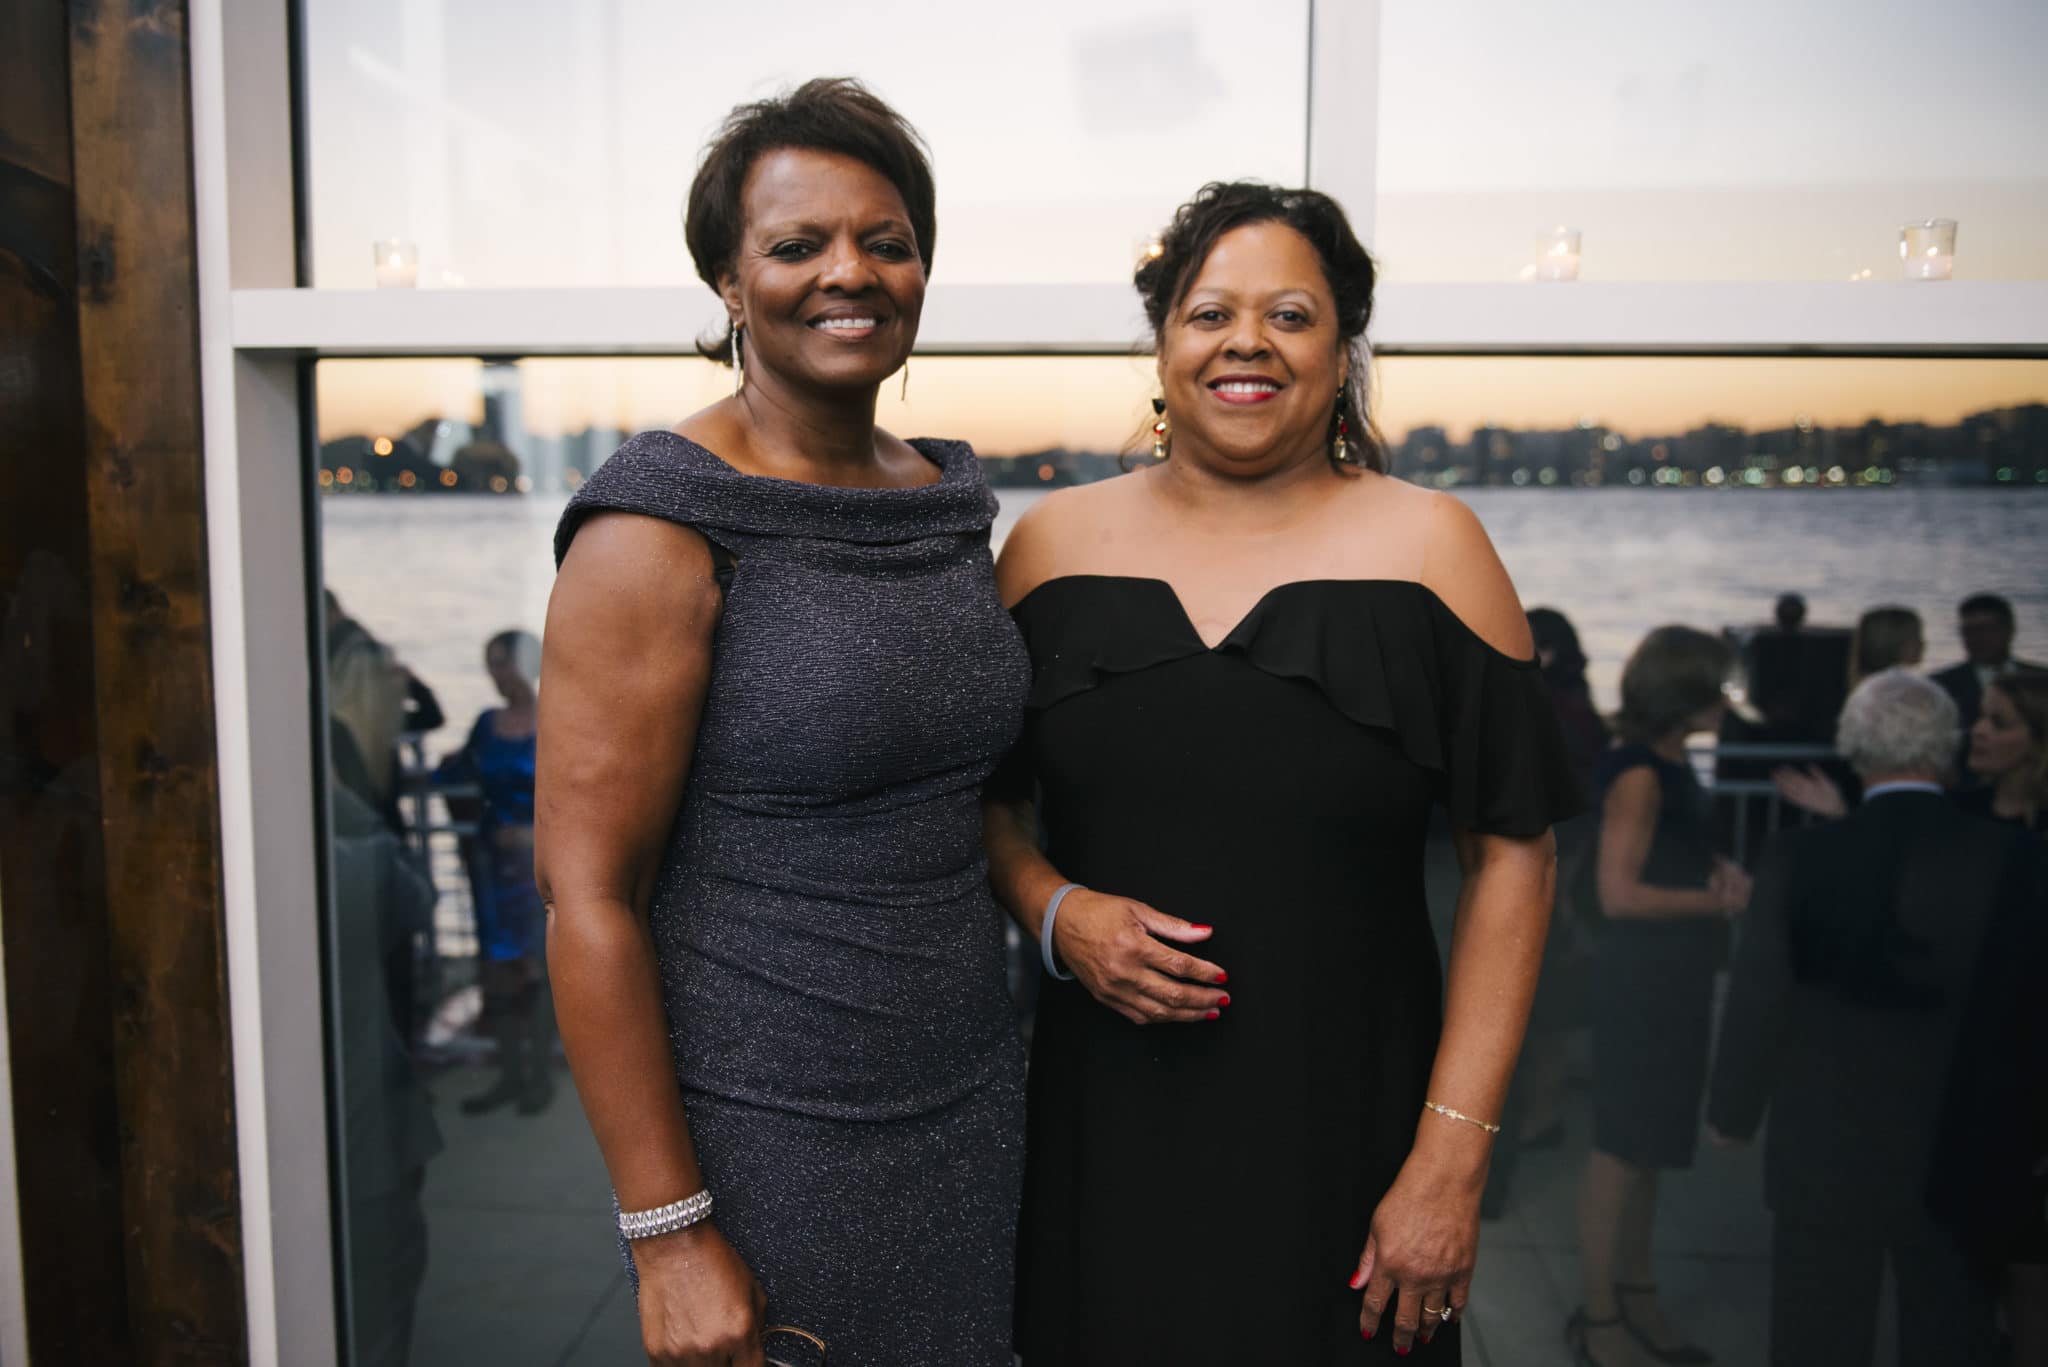 A Celebration of Community Options’ 20 years of service in New York City. Gala held Thursday, October 6, 2016 at The Lighthouse at Chelsea Piers in New York, NY.